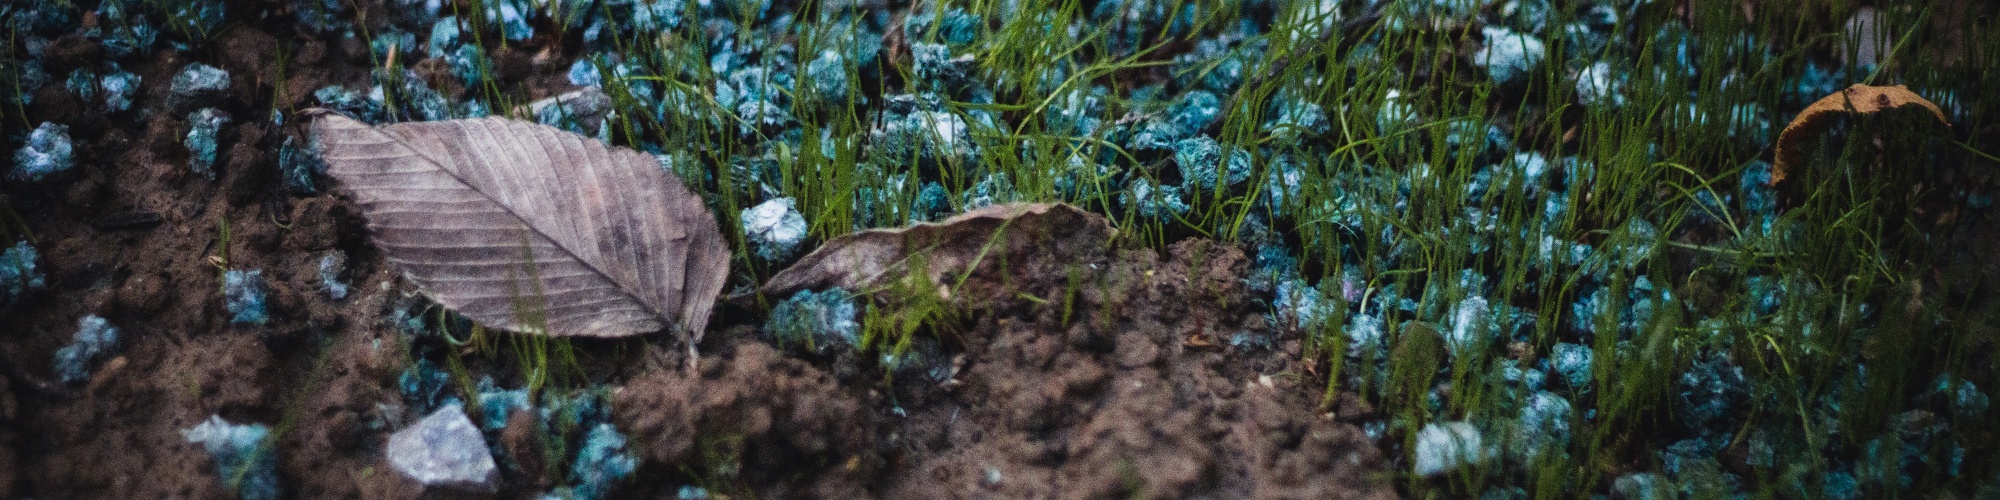 Blue fertilizer pellets lay scattered on the ground amongst leaves, grass and soil. Photo by Sean Foster via Unsplash.